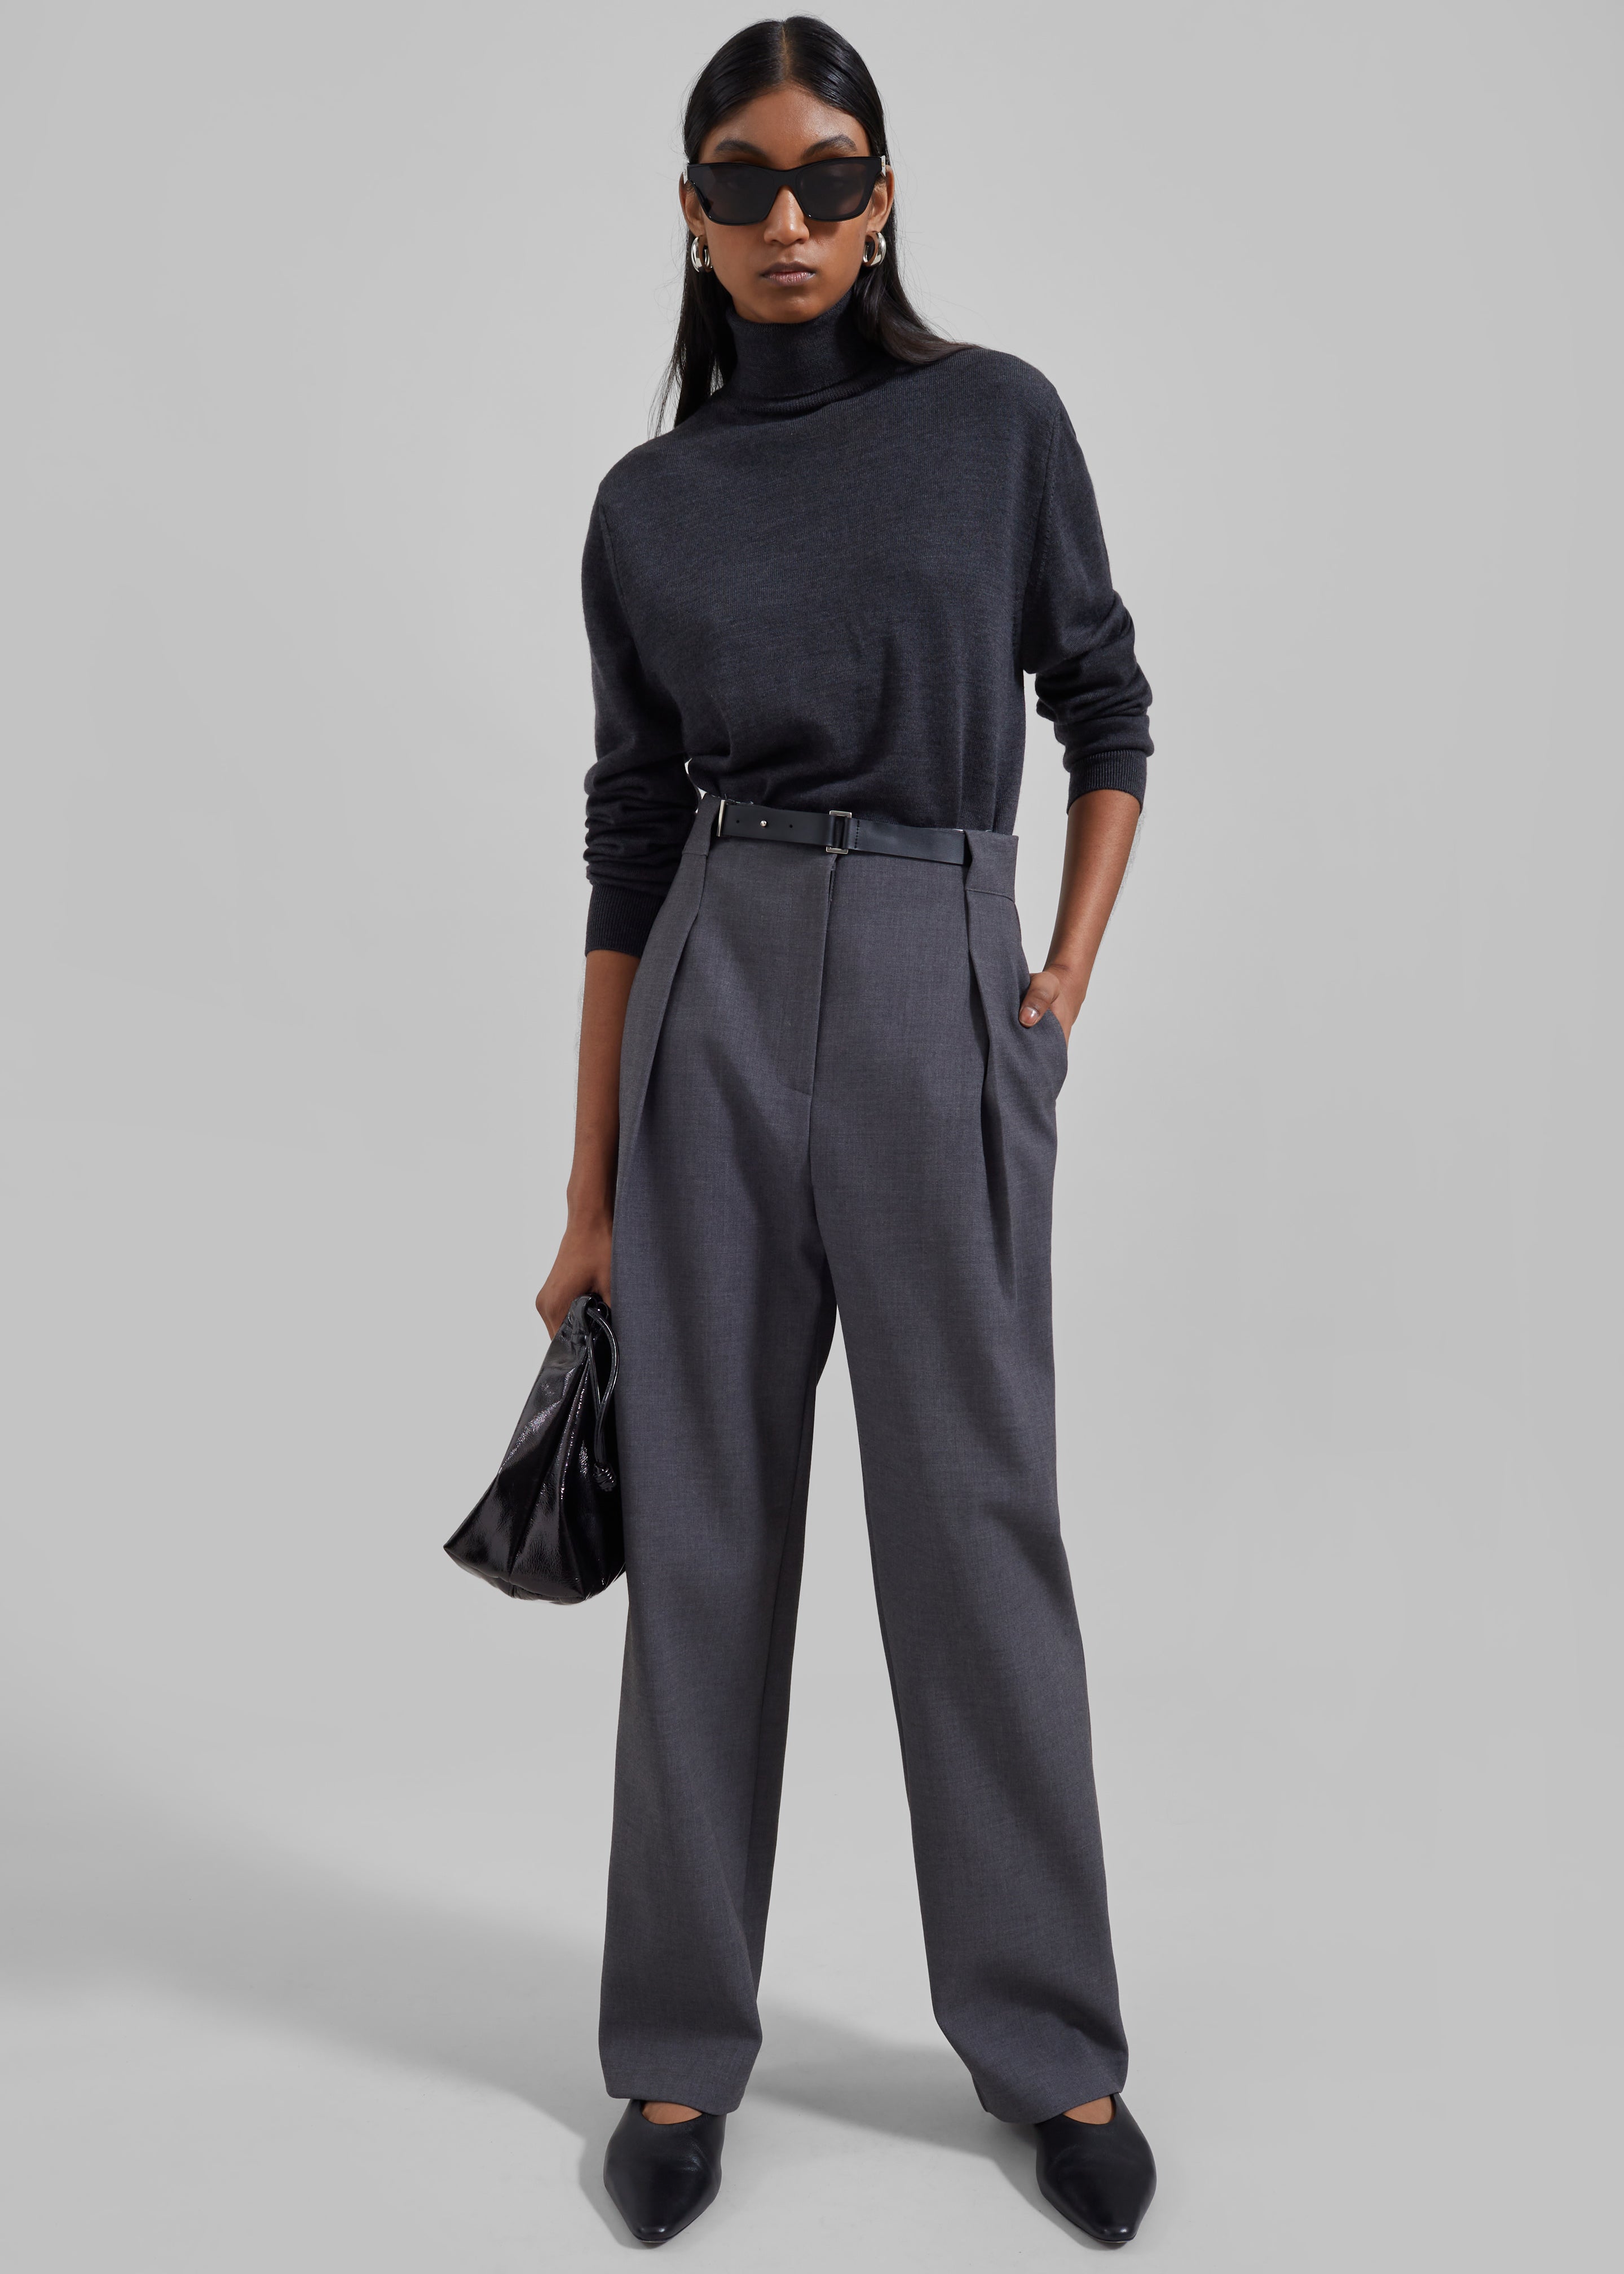 Corinne Belted Pants - Charcoal – The Frankie Shop